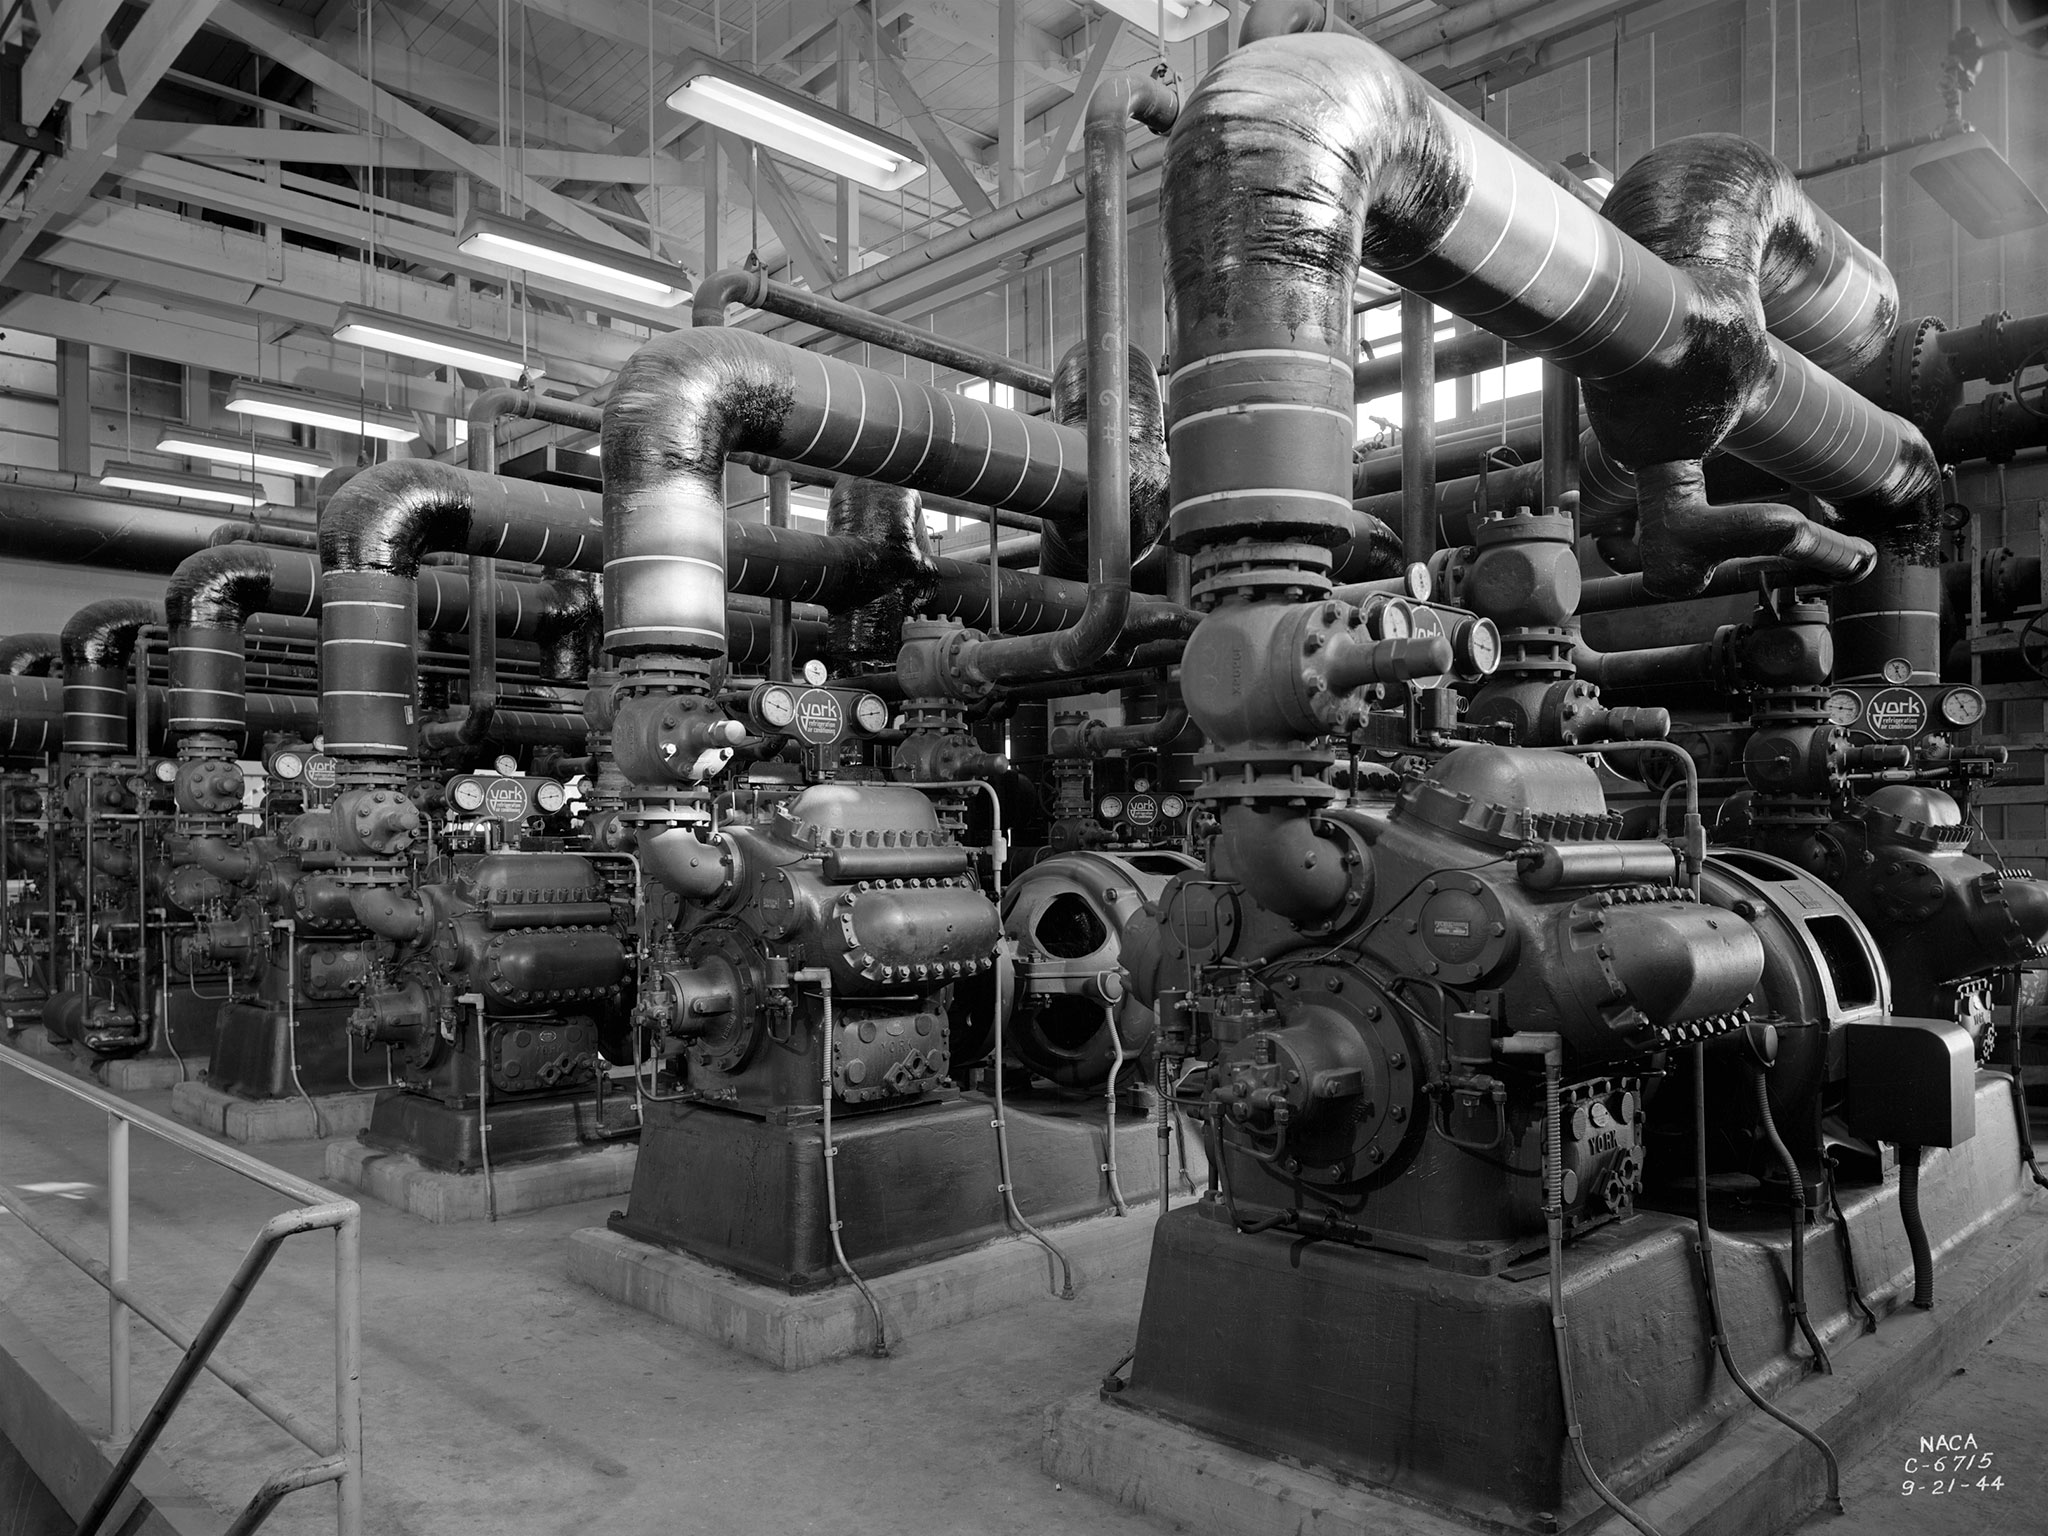 A black-and-white photo of a row of large compressors inside a warehouse building. They are metal and industrial with many gauges, tubes, and valves attached.